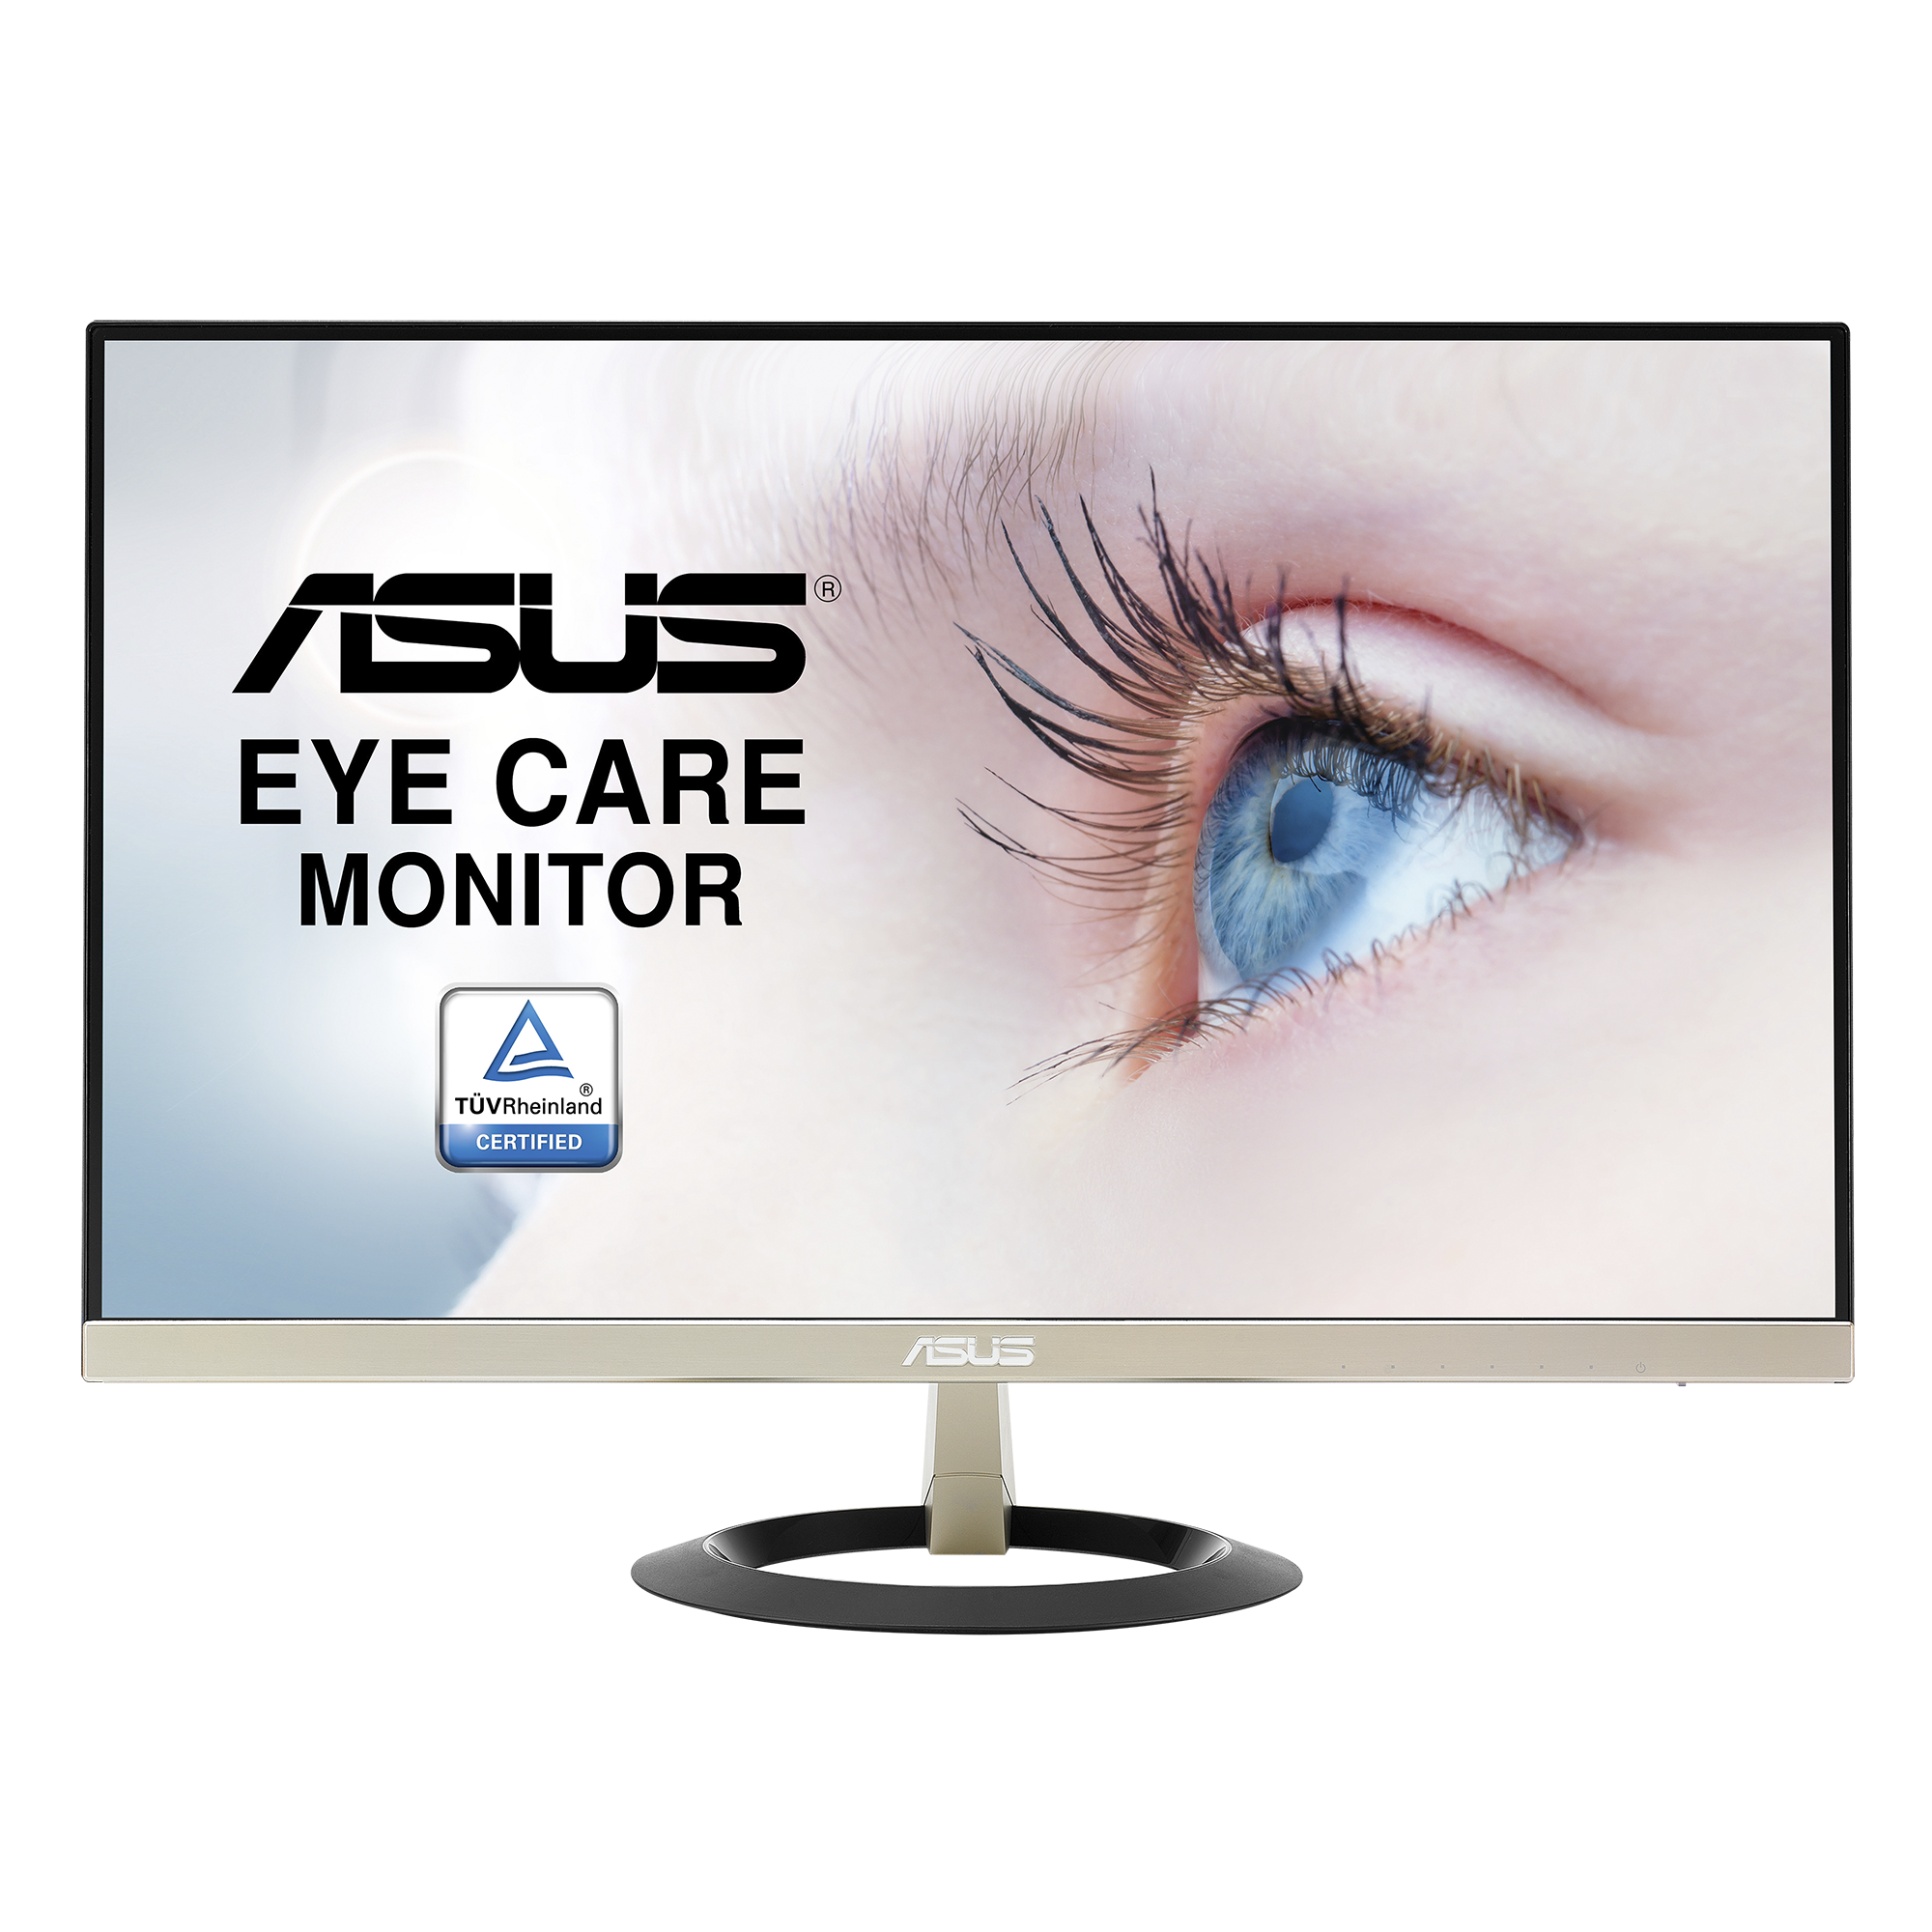 ASUS Vz249h 24inch Eye Care Monitor